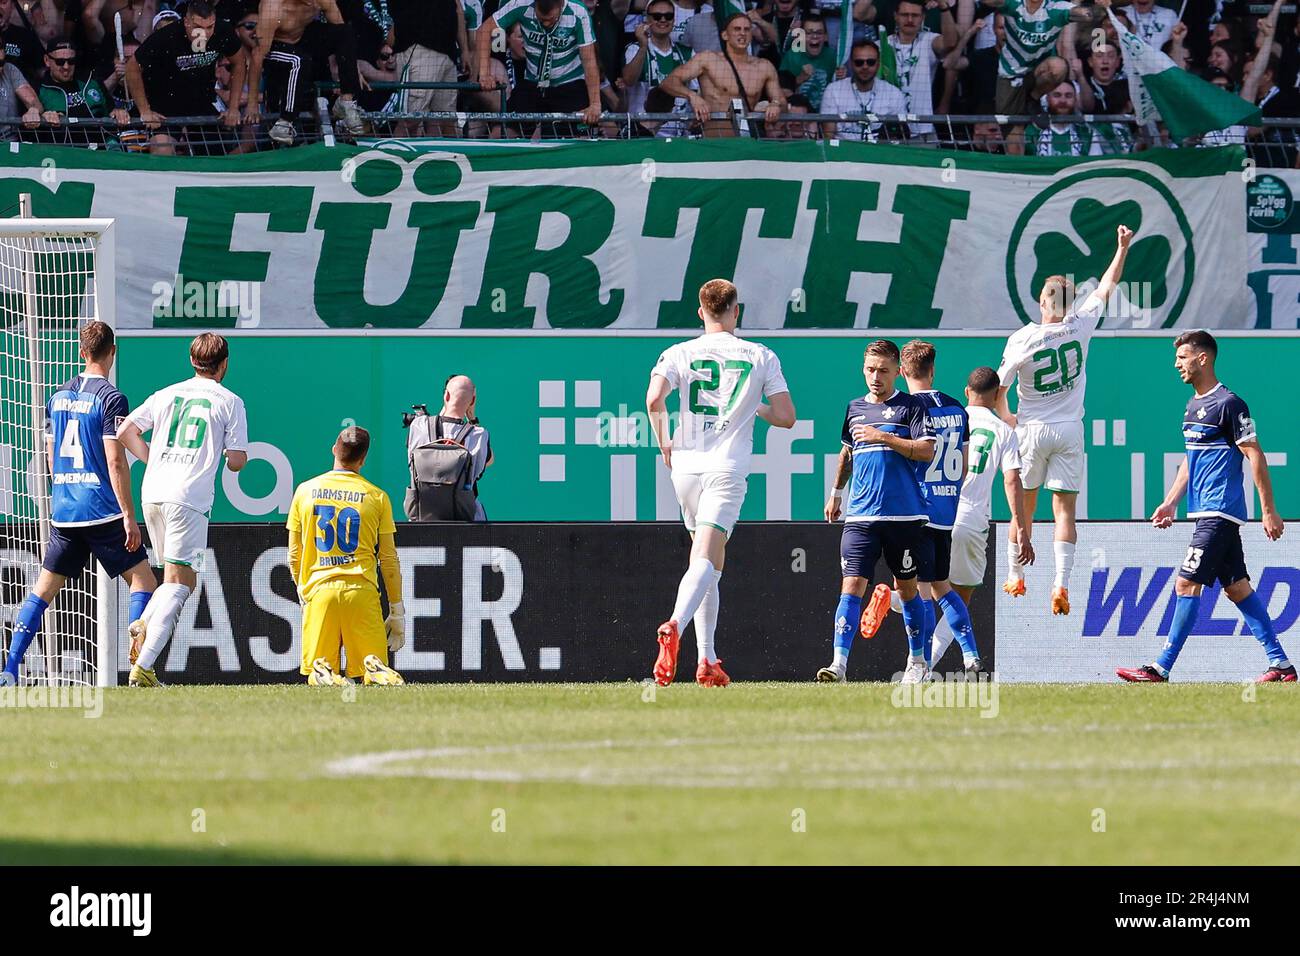 28 May 2023, Bavaria, Fürth: Soccer: 2nd Bundesliga, SpVgg Greuther Fürth - Darmstadt 98, Matchday 34, Sportpark Ronhof Thomas Sommer. Tobias Raschl (2nd from right) celebrates after scoring the 1:0 goal for Greuth Fürth. Photo: Daniel Löb/dpa - IMPORTANT NOTE: In accordance with the requirements of the DFL Deutsche Fußball Liga and the DFB Deutscher Fußball-Bund, it is prohibited to use or have used photographs taken in the stadium and/or of the match in the form of sequence pictures and/or video-like photo series. Stock Photo